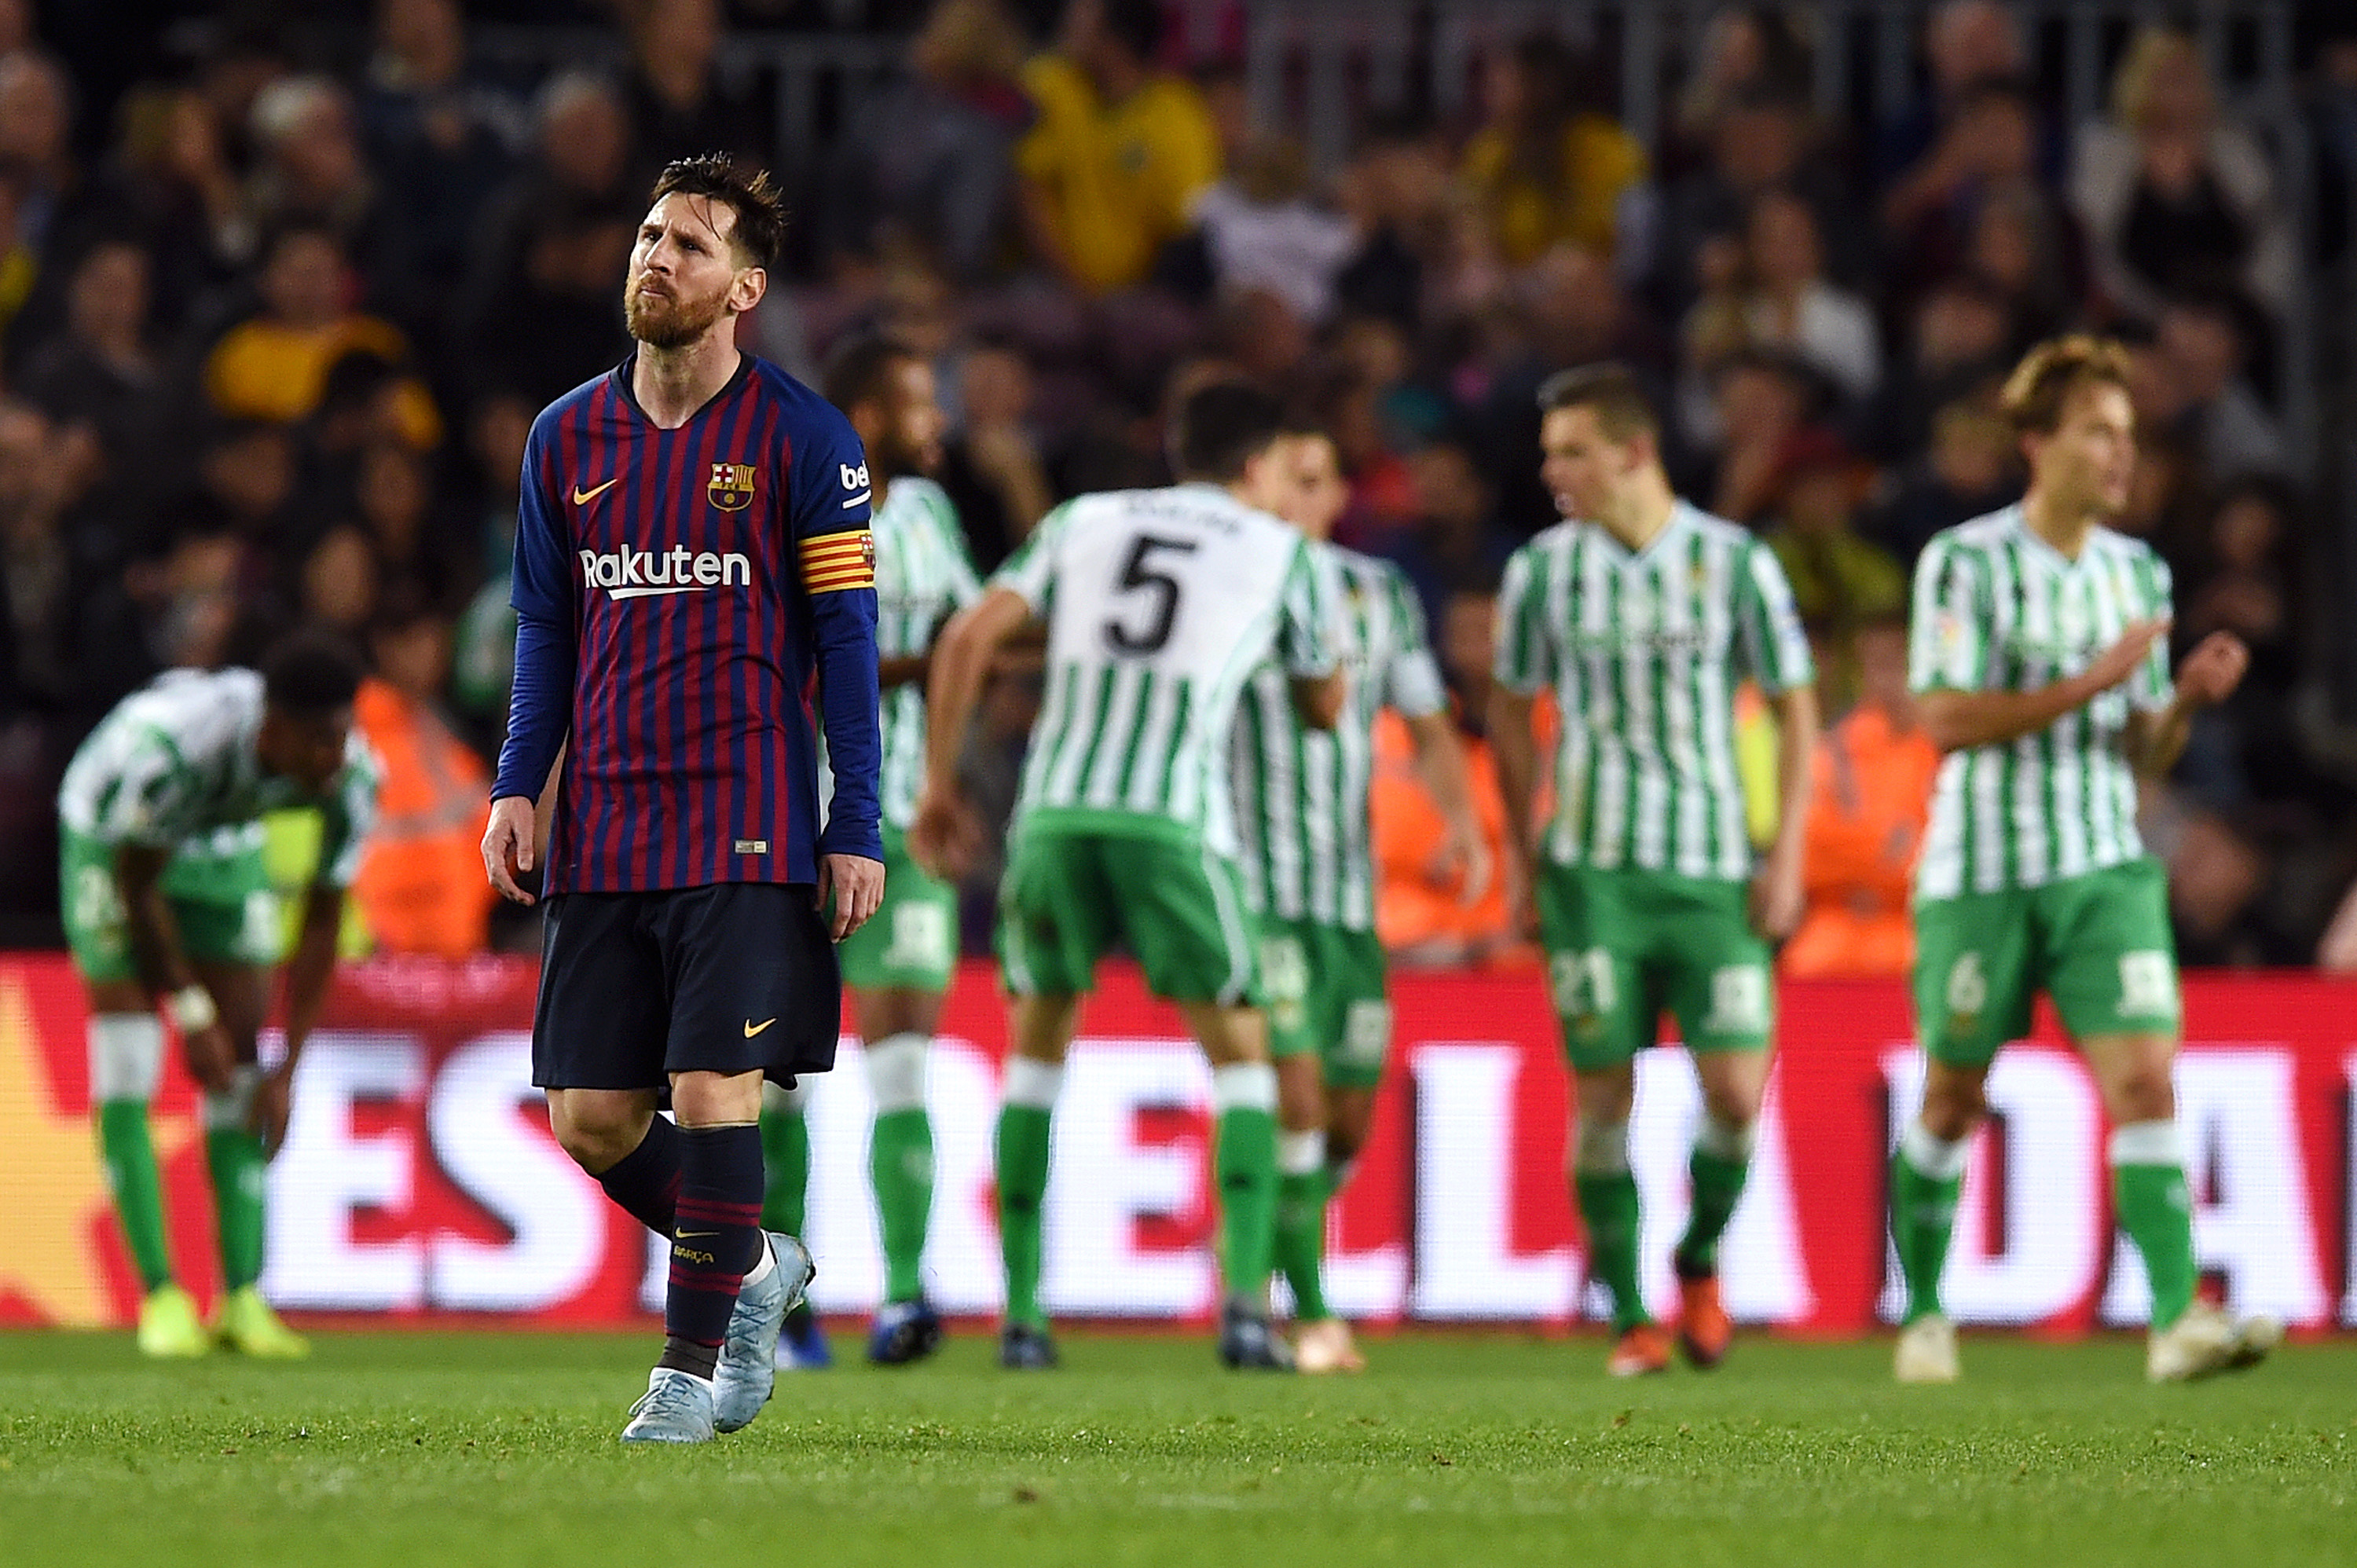 BARCELONA, SPAIN - NOVEMBER 11: Lionel Messi of Barcelona looks dejected as the Real Betis players celebrate their sides fourth goal during the La Liga match between FC Barcelona and Real Betis Balompie at Camp Nou on November 11, 2018 in Barcelona, Spain.  (Photo by Alex Caparros/Getty Images)